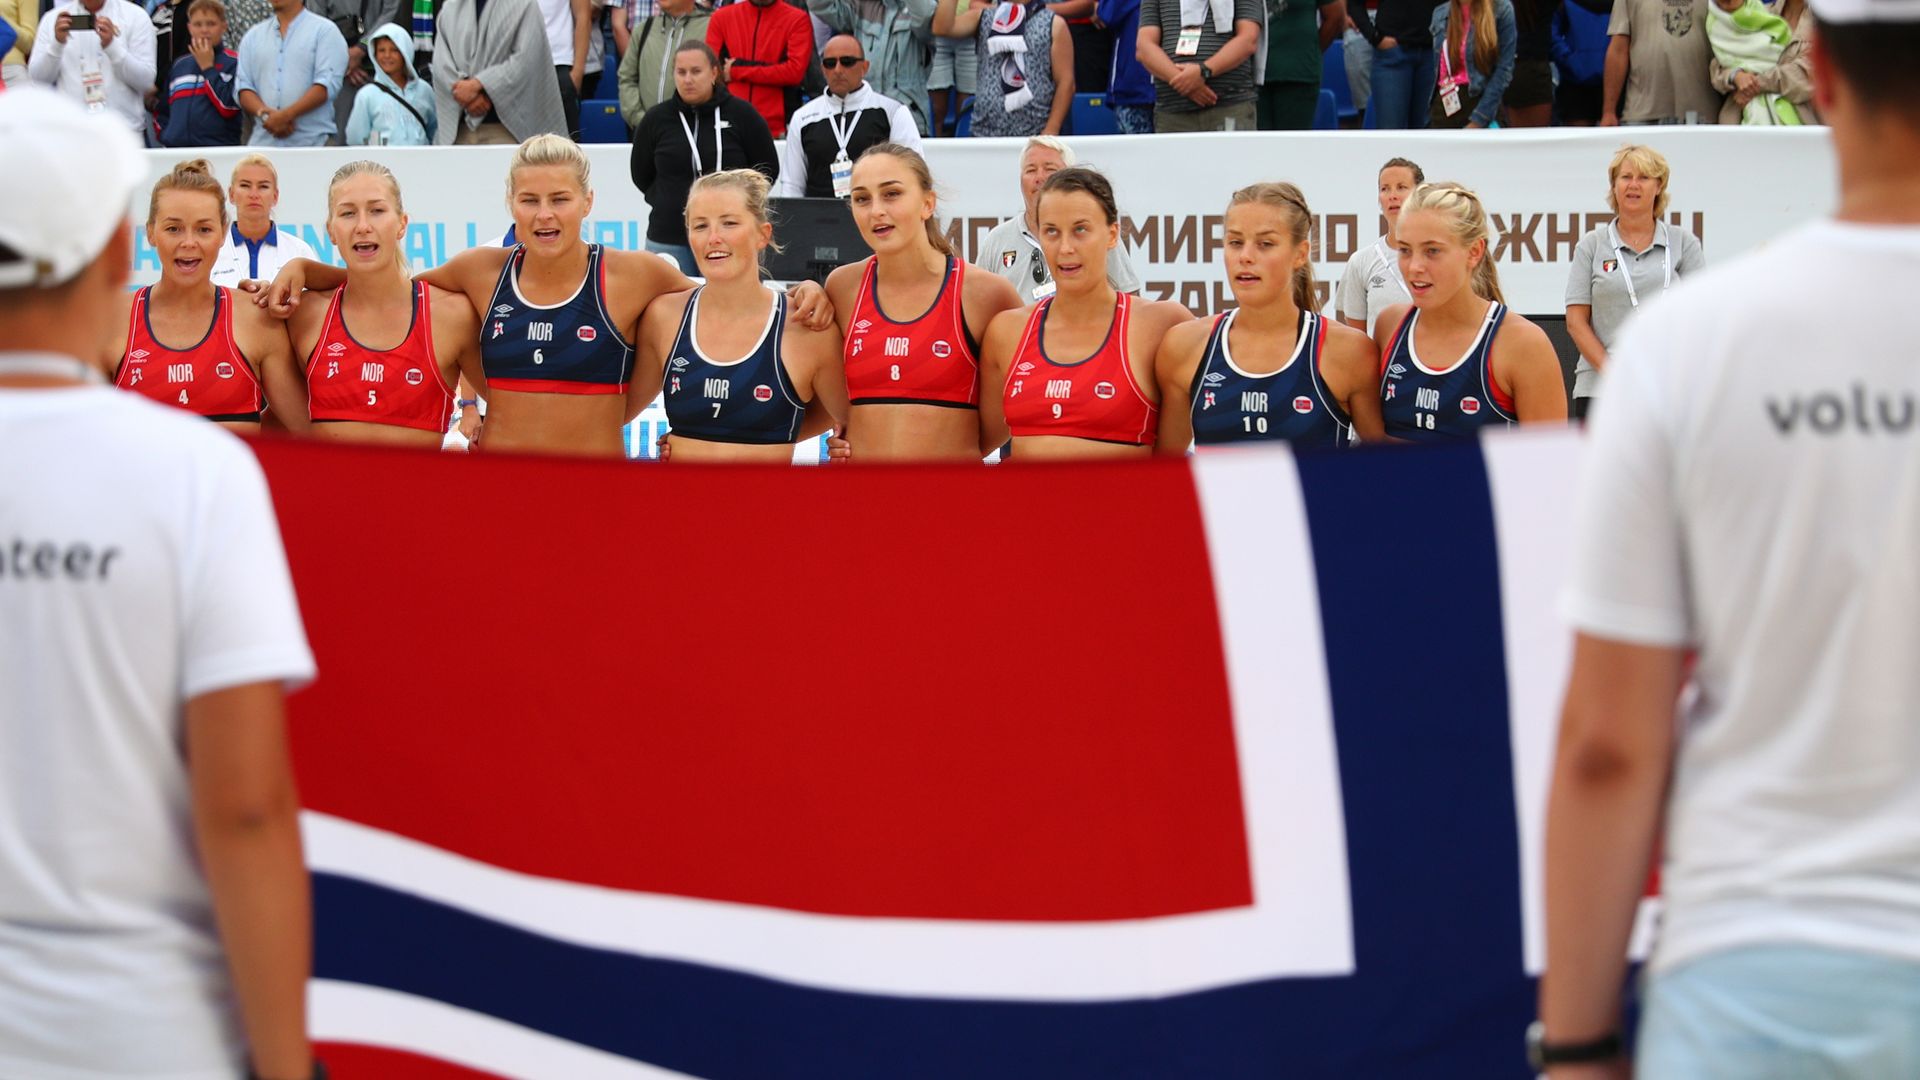 Norway team line up during 2018 Women's Beach Handball World Cup final against Greece on July 29, 2018